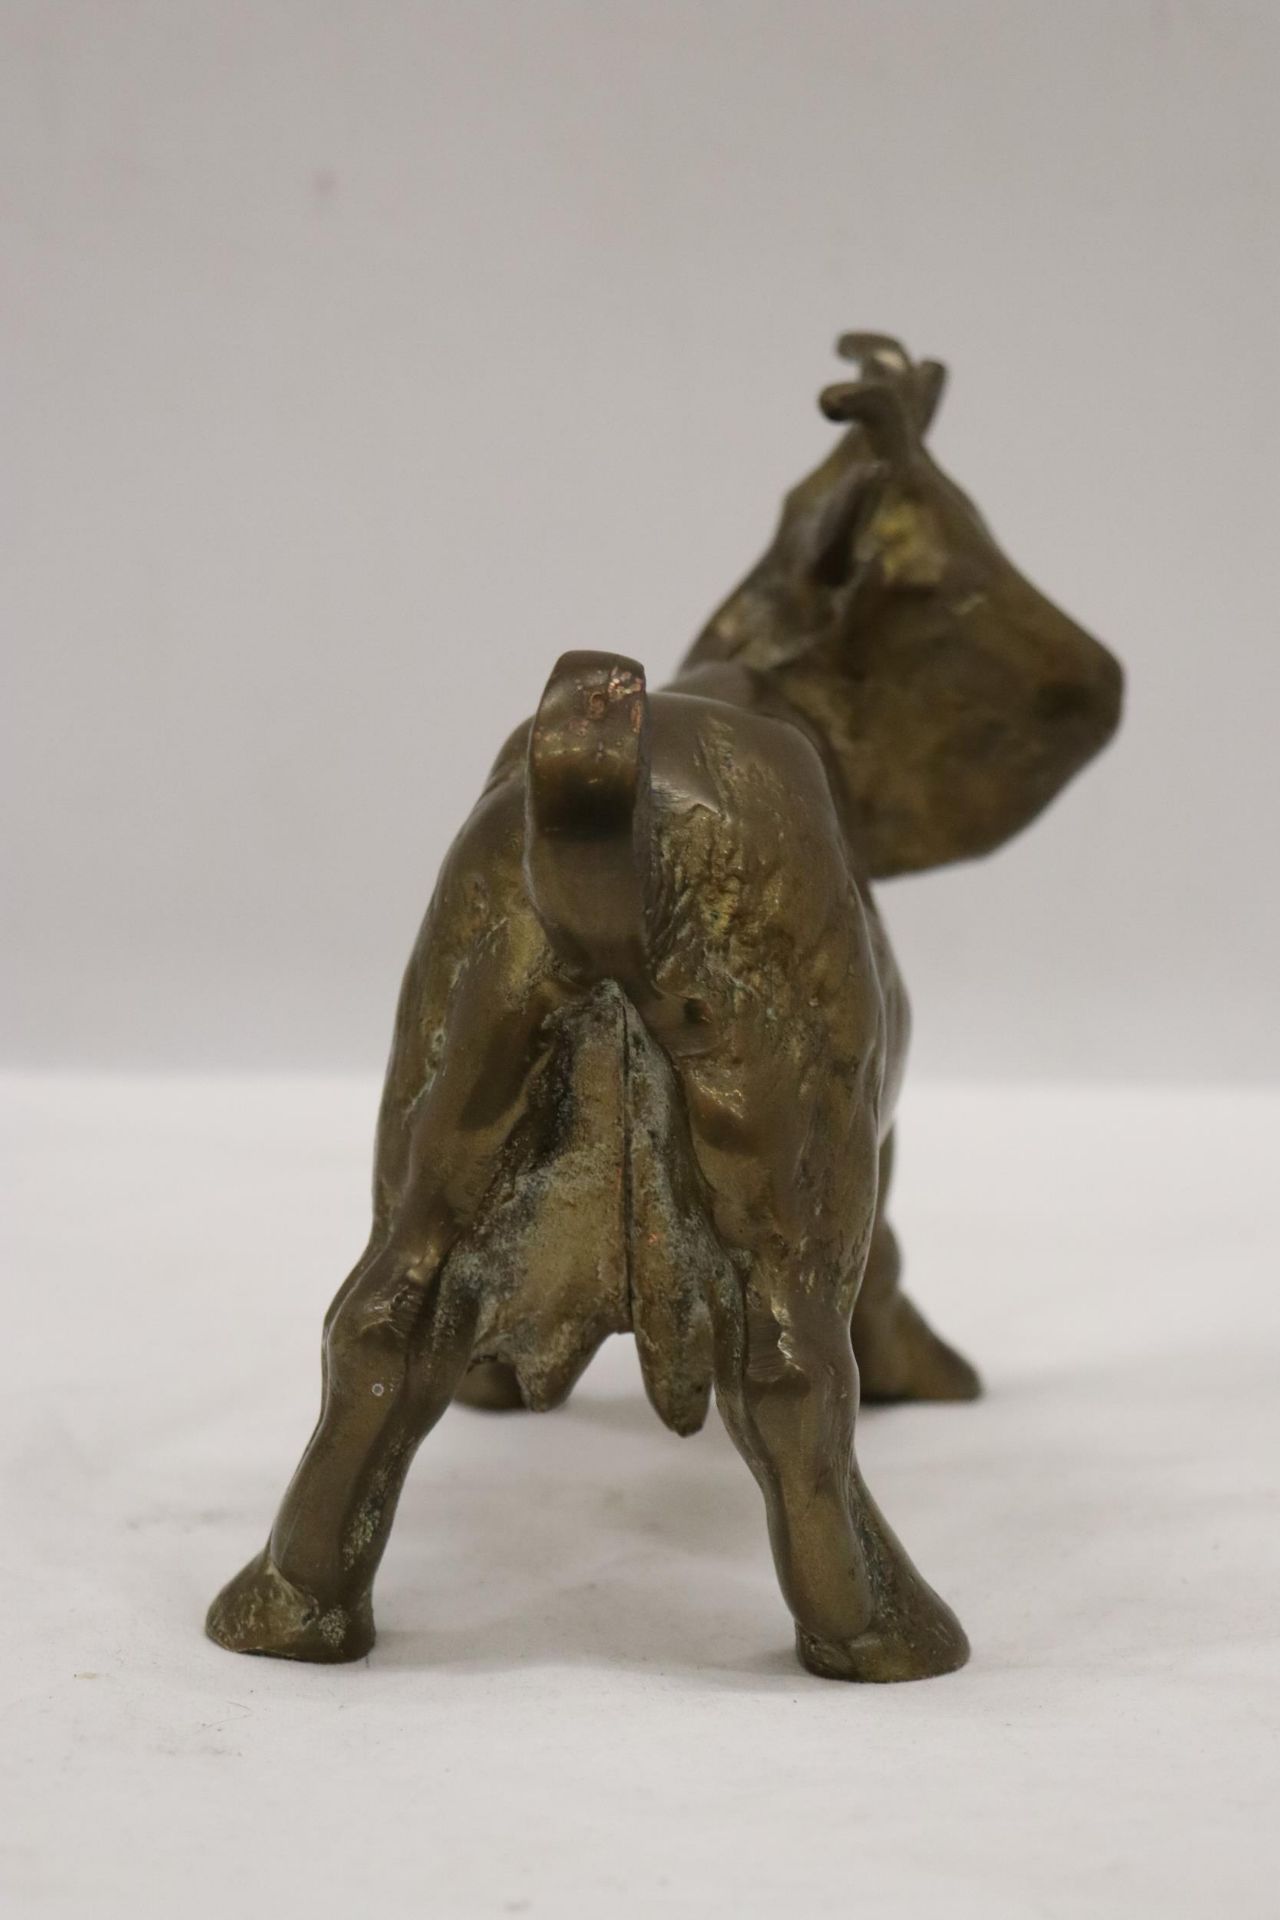 A VERY HEAVY SOLID BRASS GOAT, HEIGHT 16CM, LENGTH 18CM - Image 4 of 5